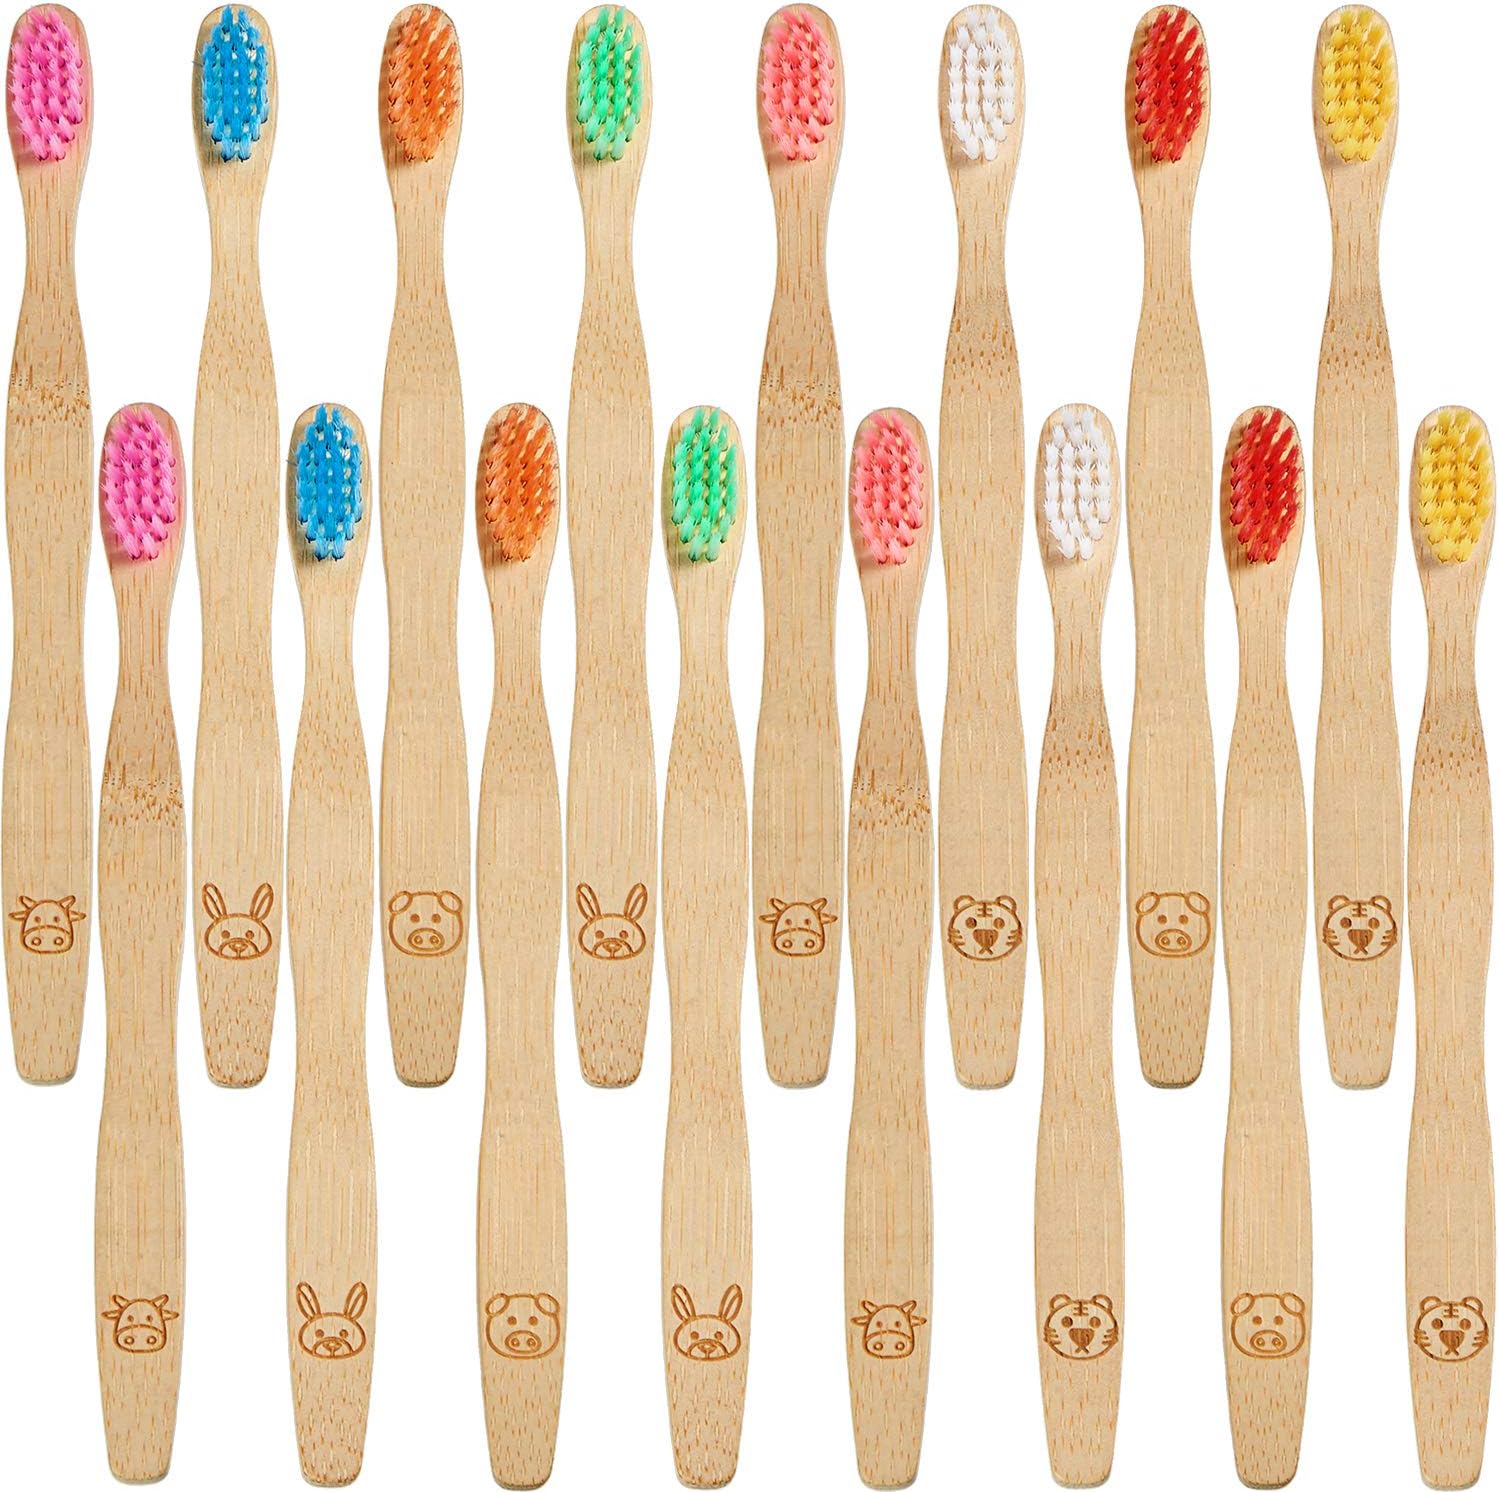 Best Non-Toxic Toothbrush